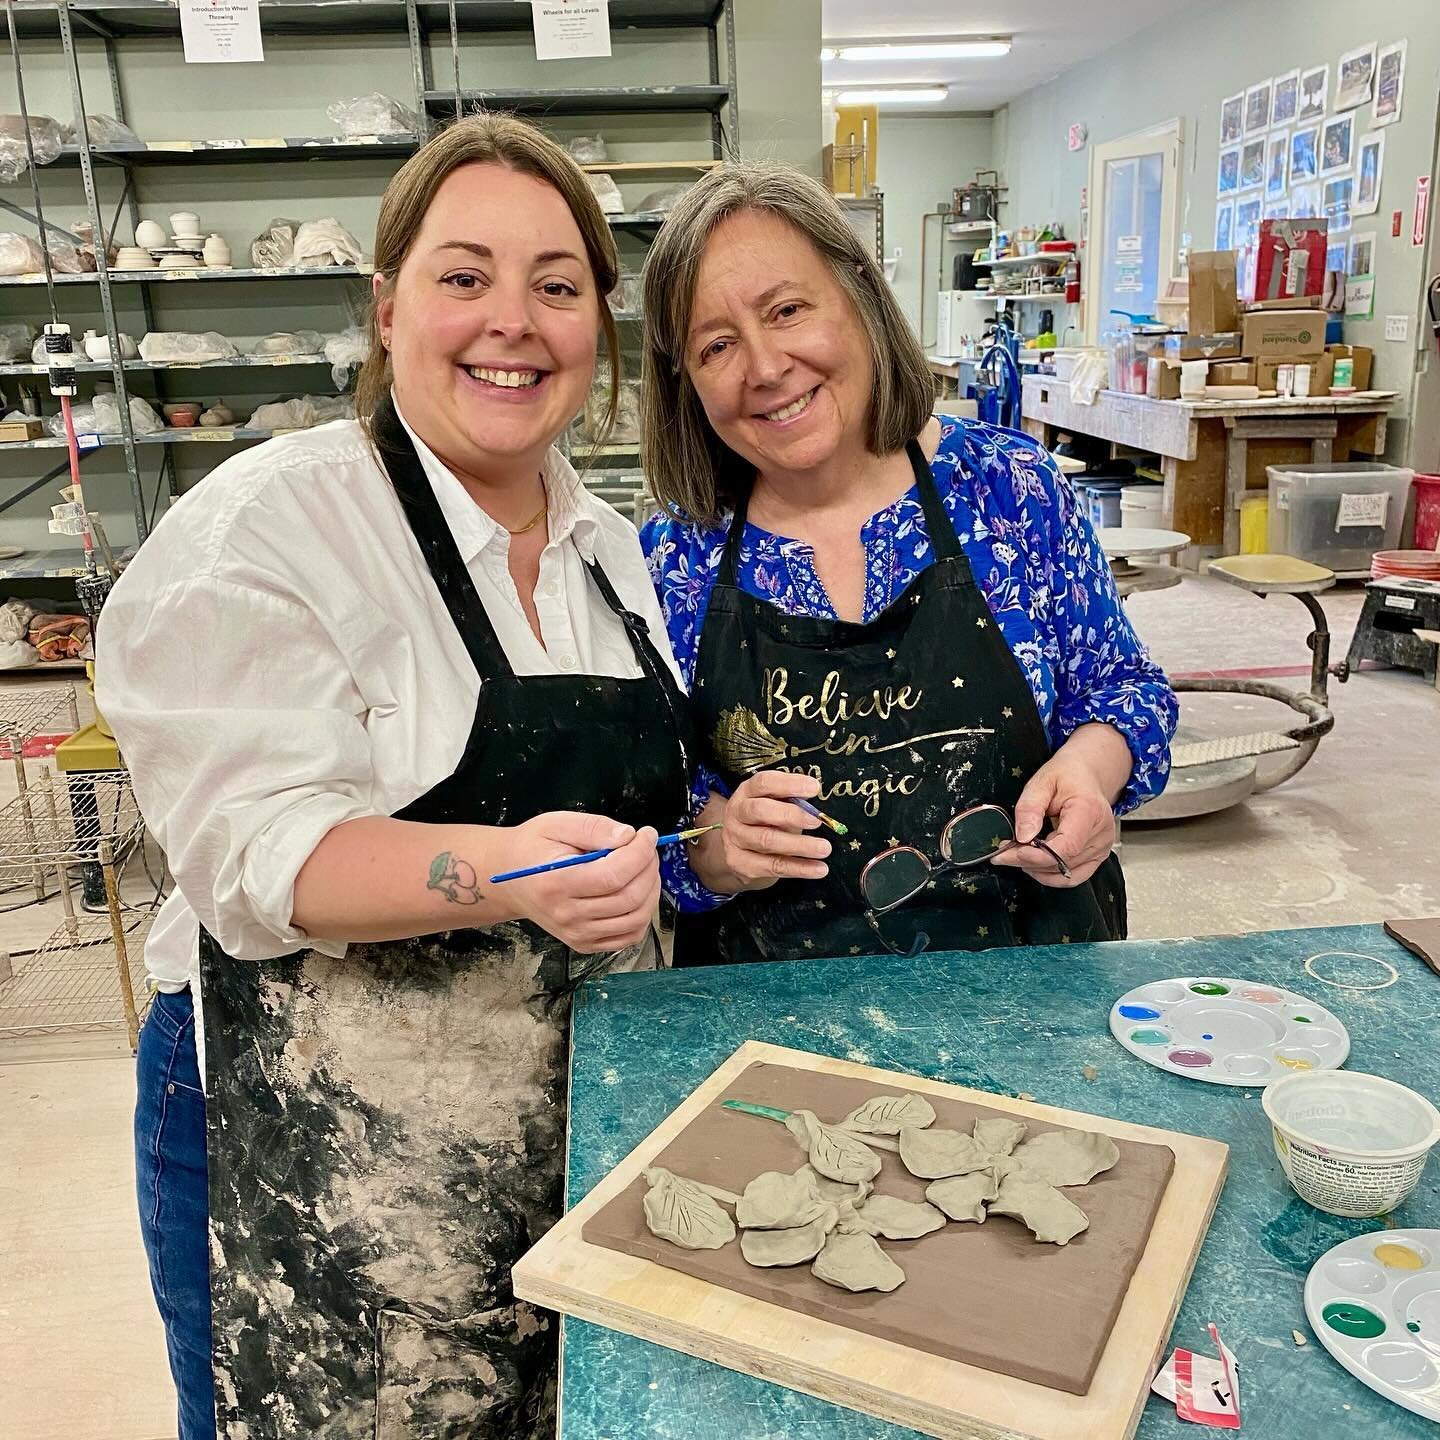 Happy Mother&rsquo;s Day to all the moms, godmothers, grandmothers, caregivers, and people in our lives who nurture! Yesterday was a fun day in our studios with a ceramic floral mirror frame workshop led by Jeff Dean. A creative day with clay is the 